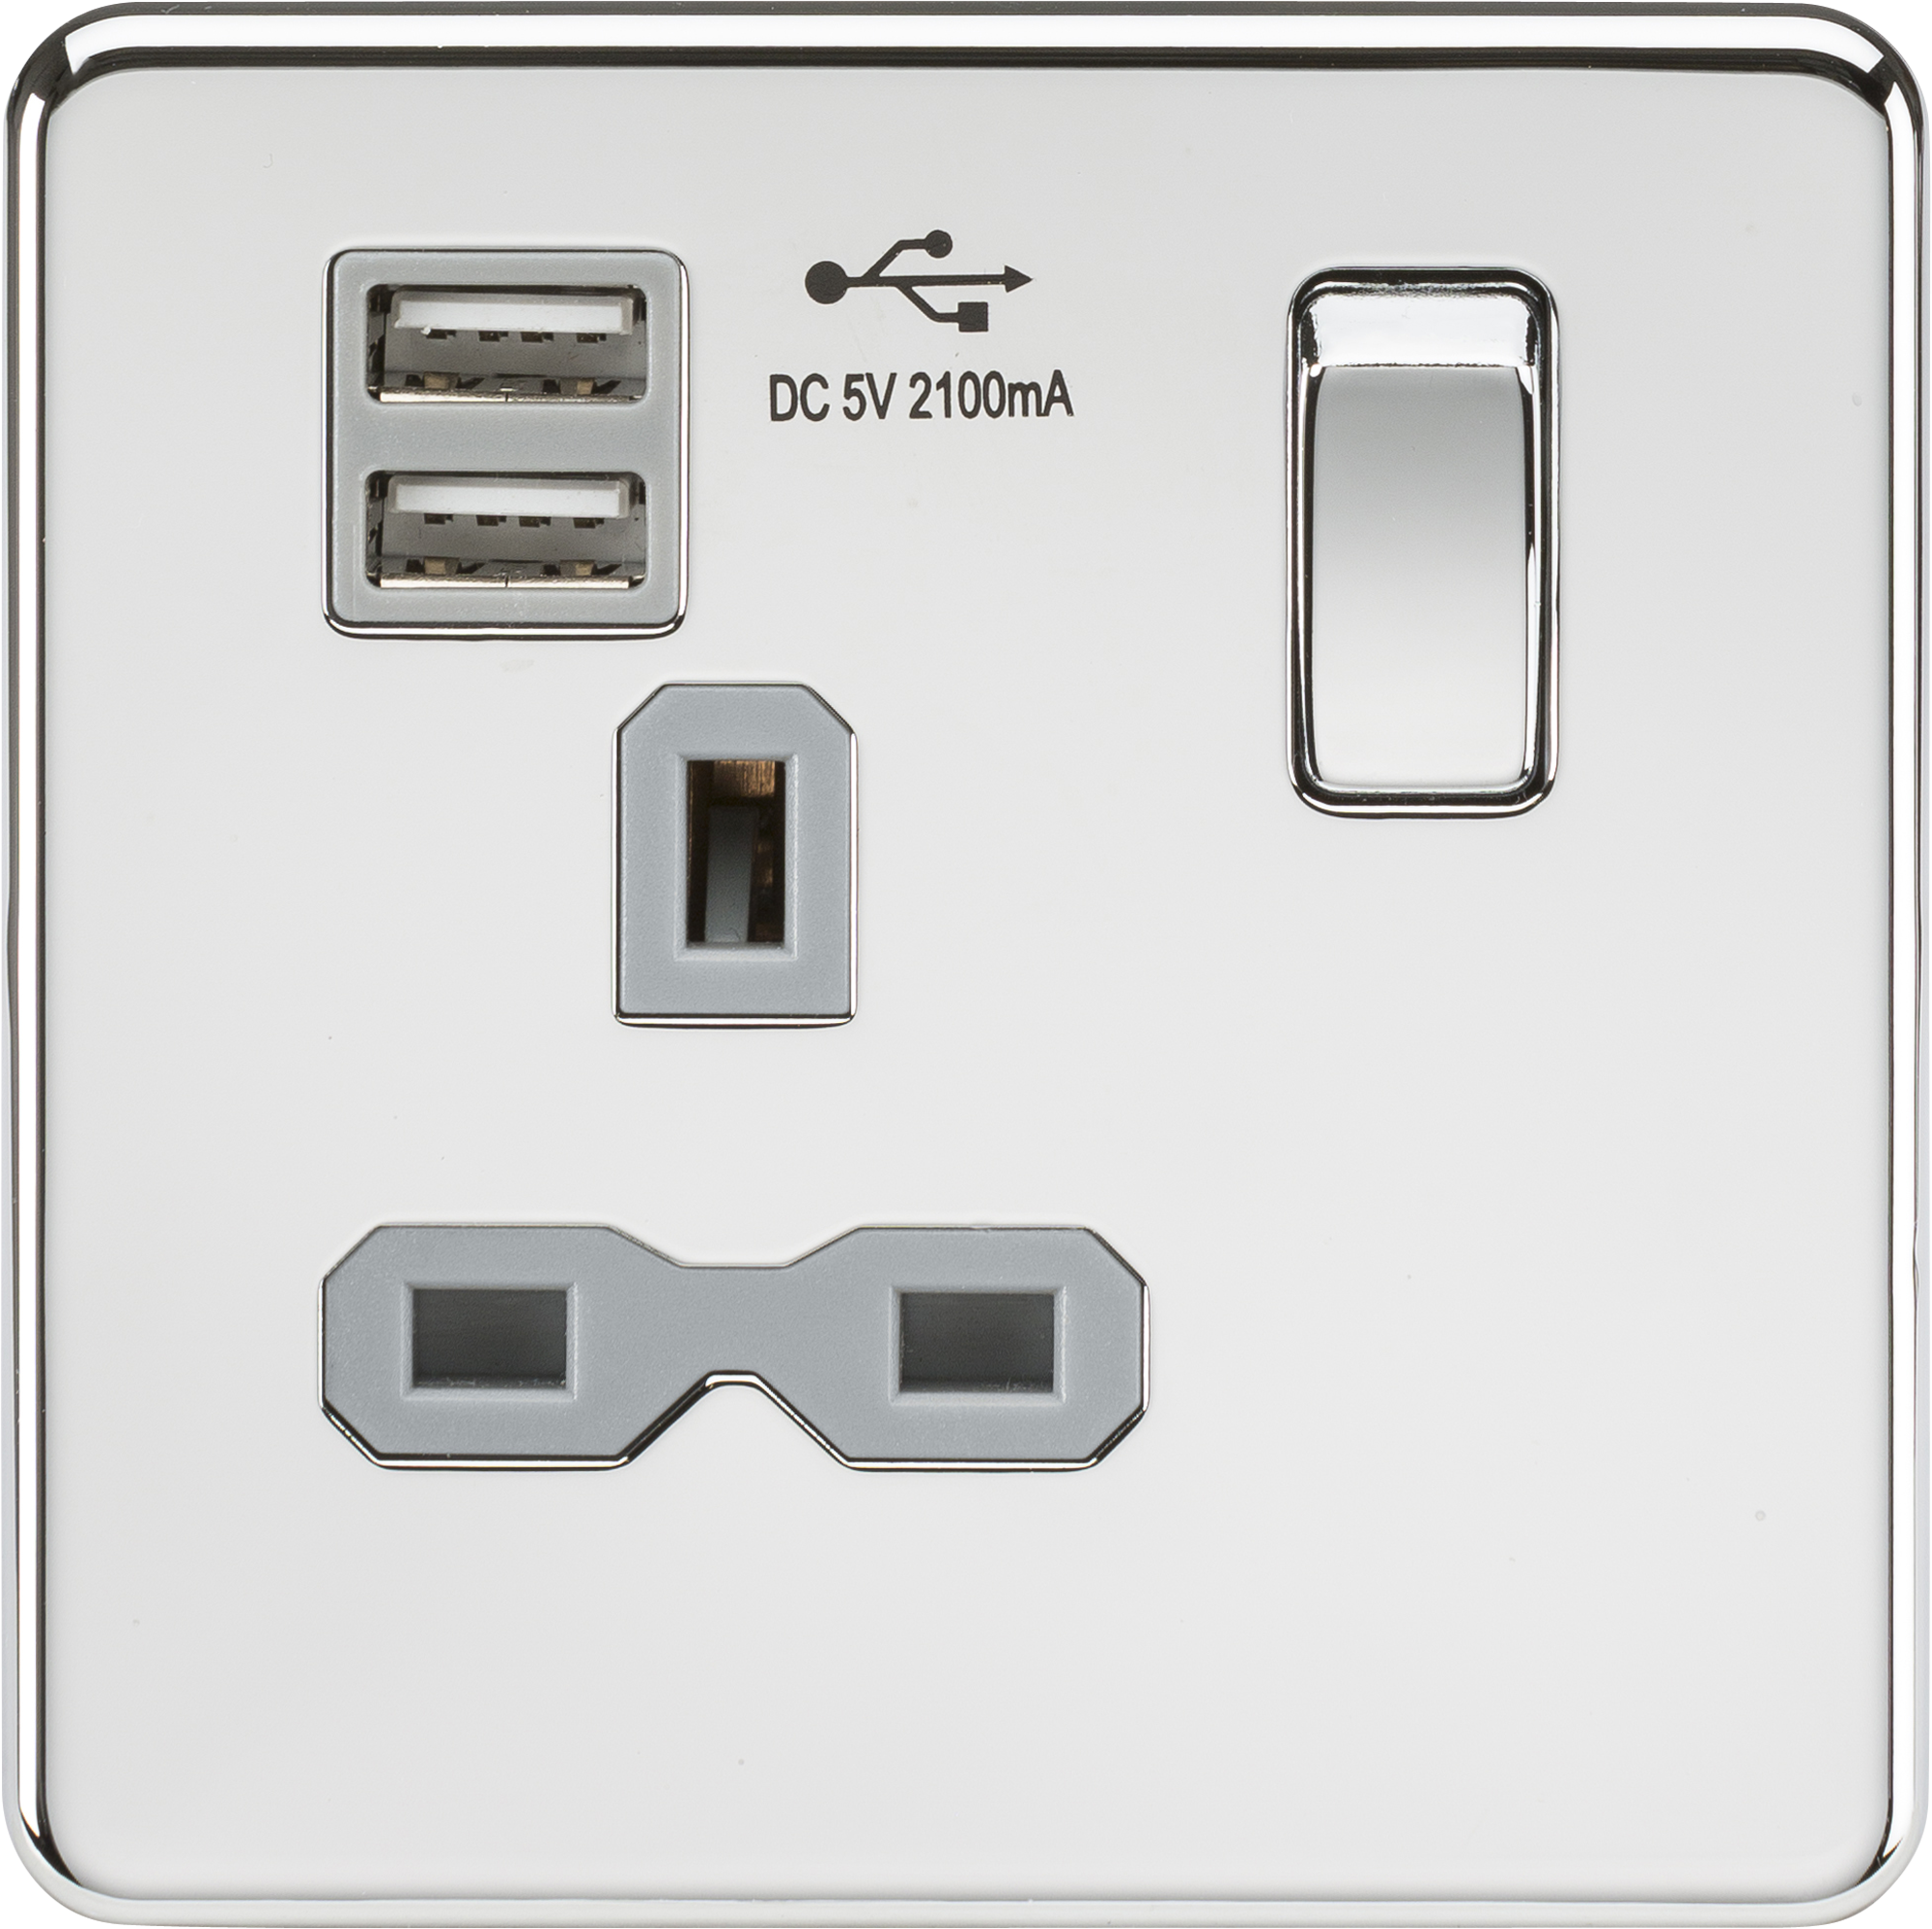 Screwless 13A 1G Switched Socket With Dual USB Charger (2.1A) - Polished Chrome With Grey Insert - SFR9901PCG 